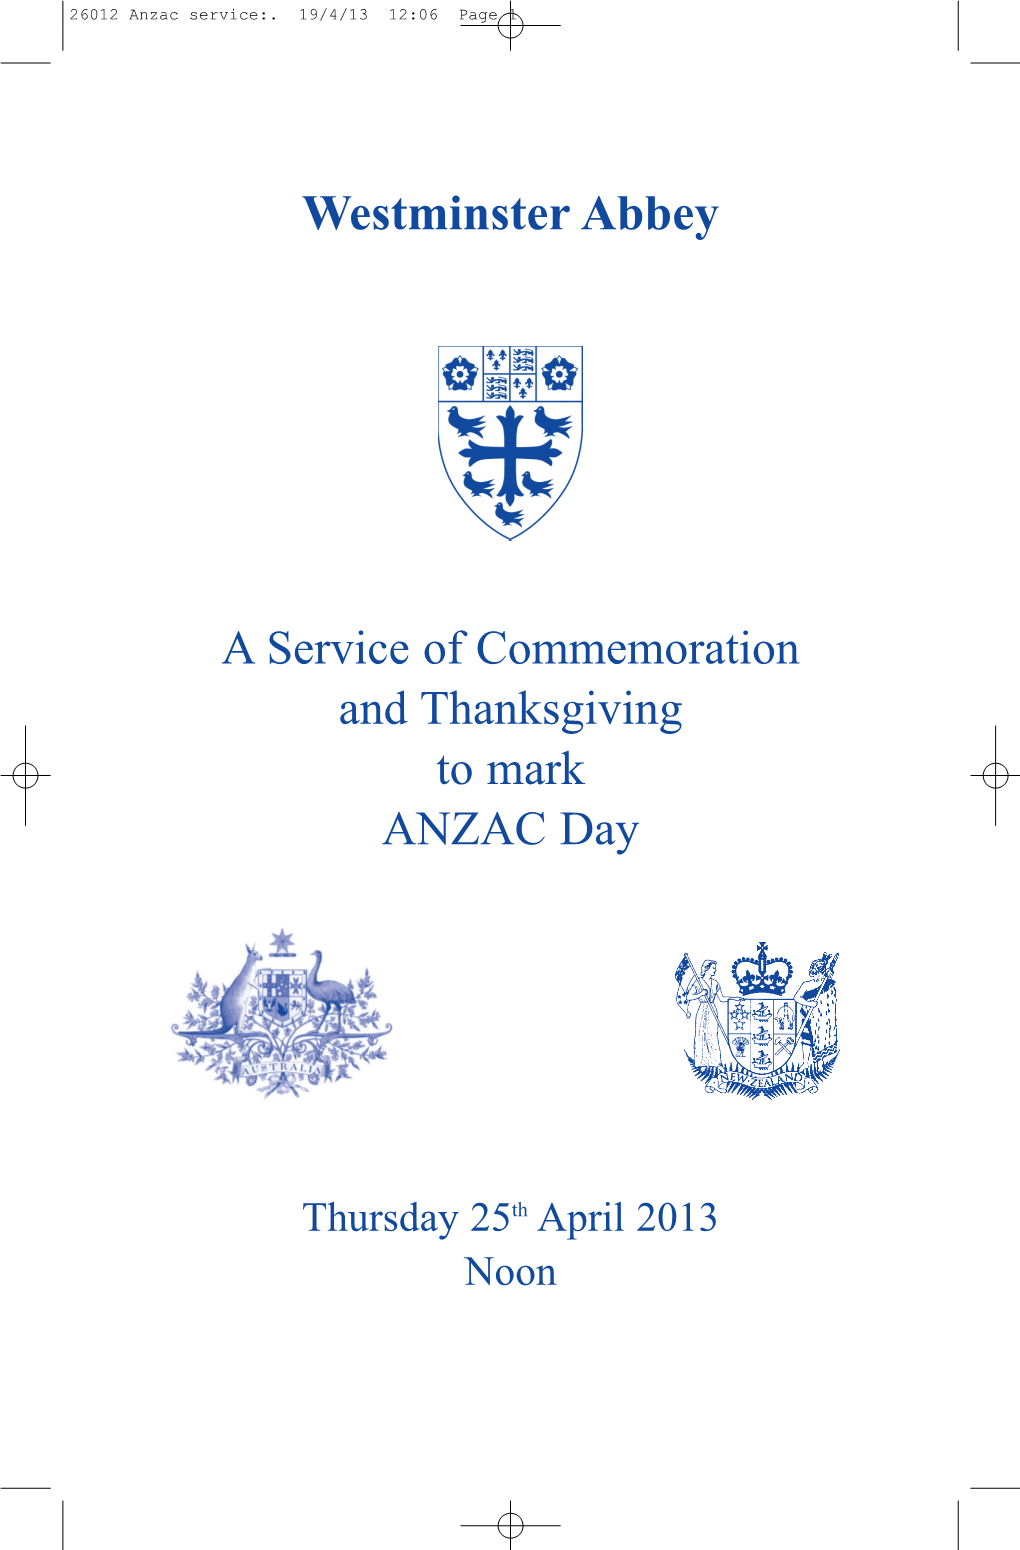 A Service of Commemoration and Thanksgiving to Mark ANZAC Day